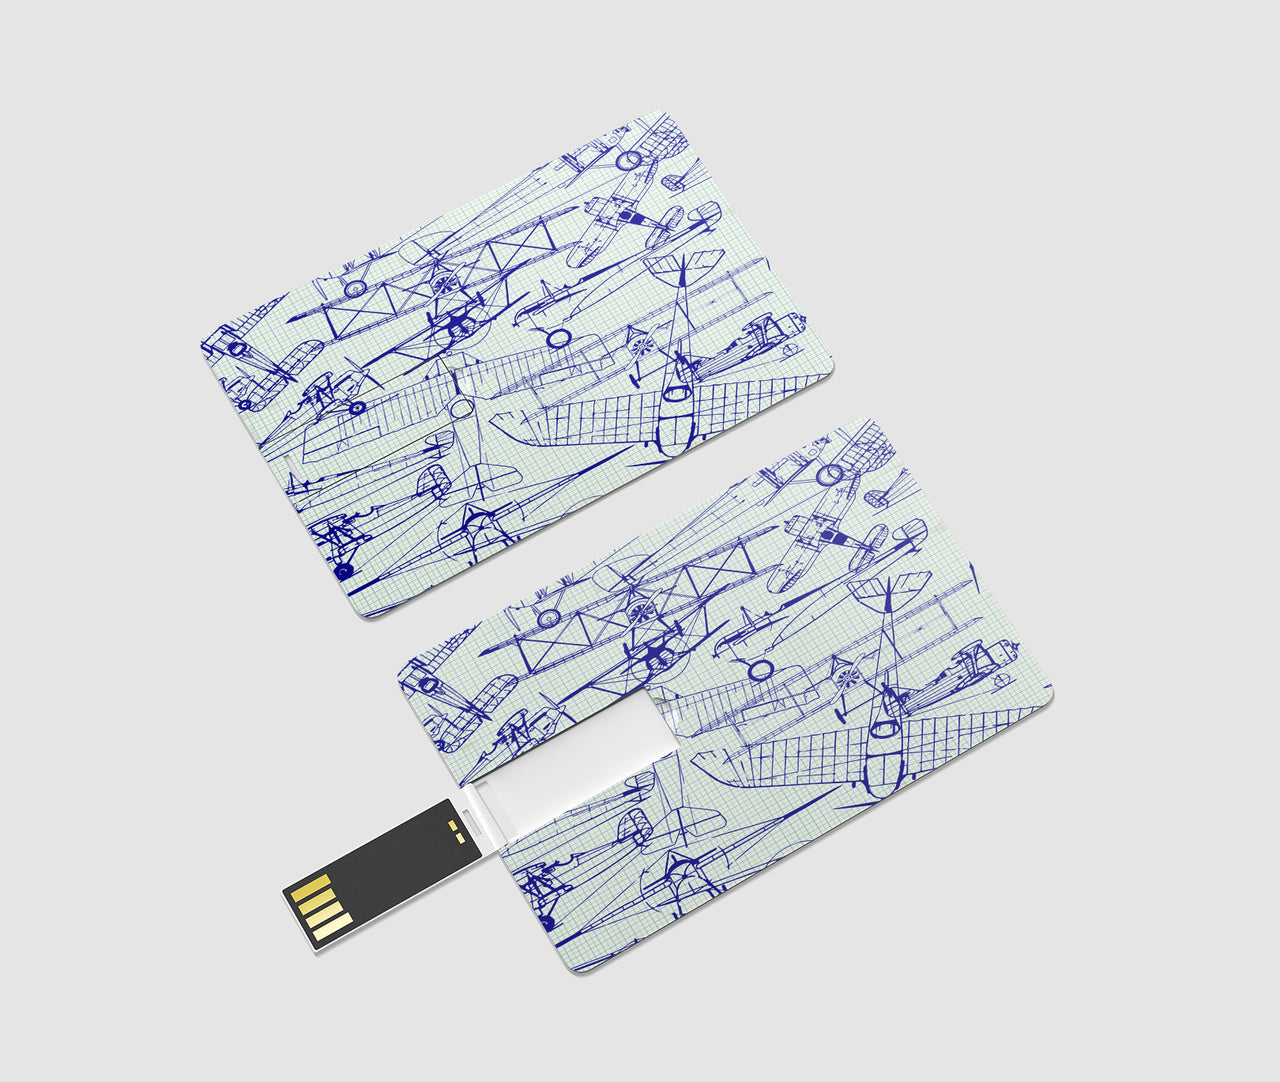 Amazing Drawings of Old Aircrafts Designed USB Cards